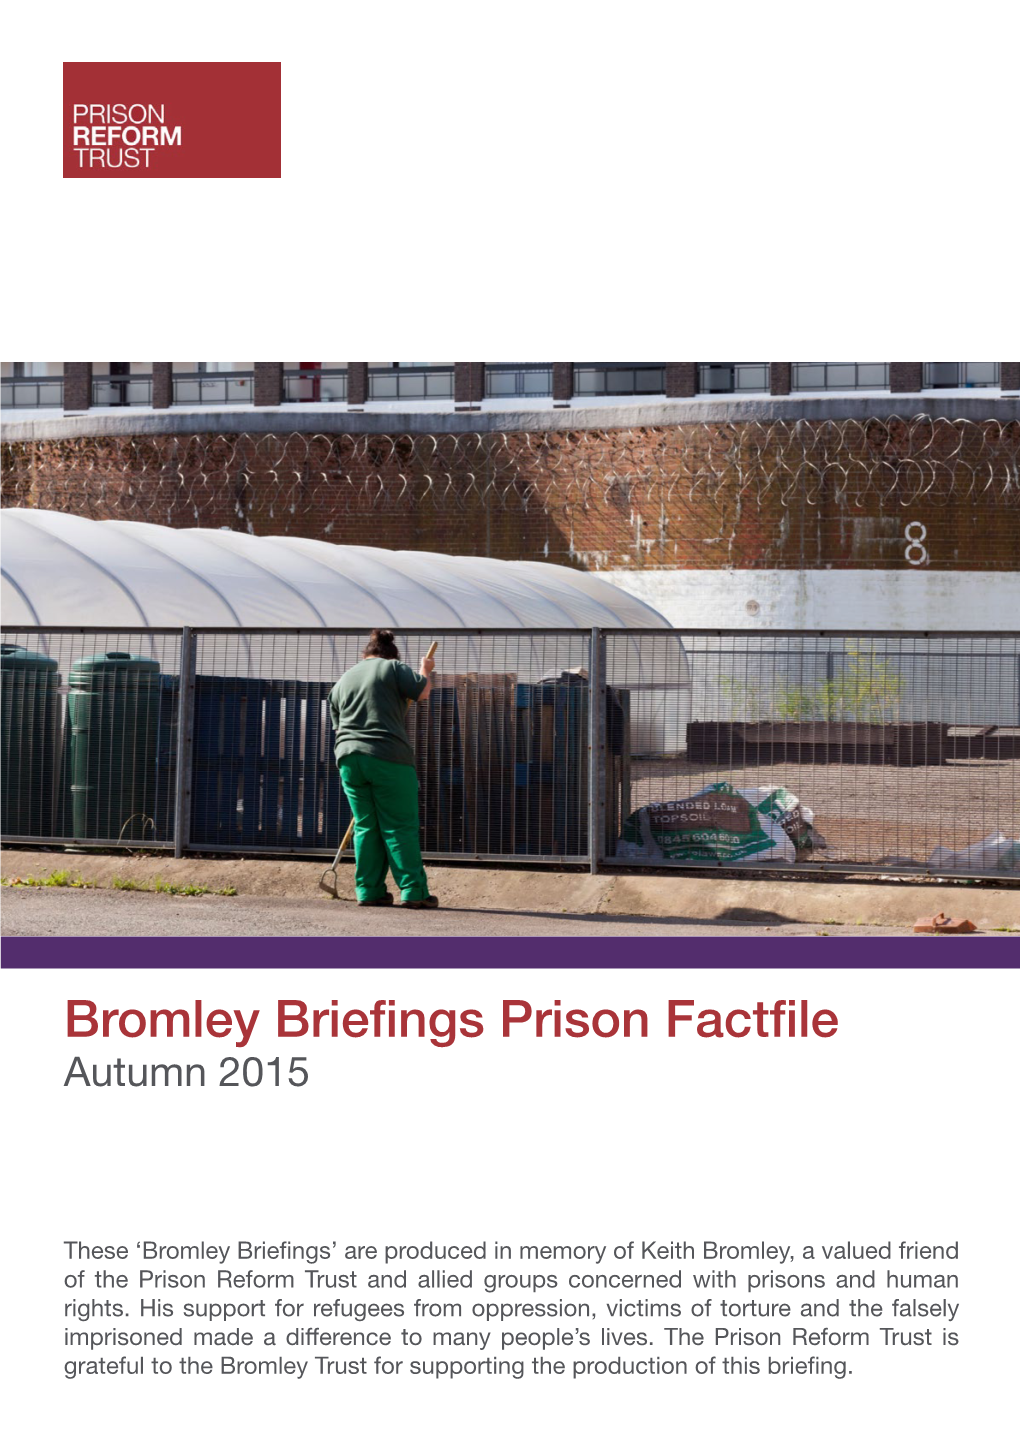 Bromley Briefings Prison Factfile (2015)